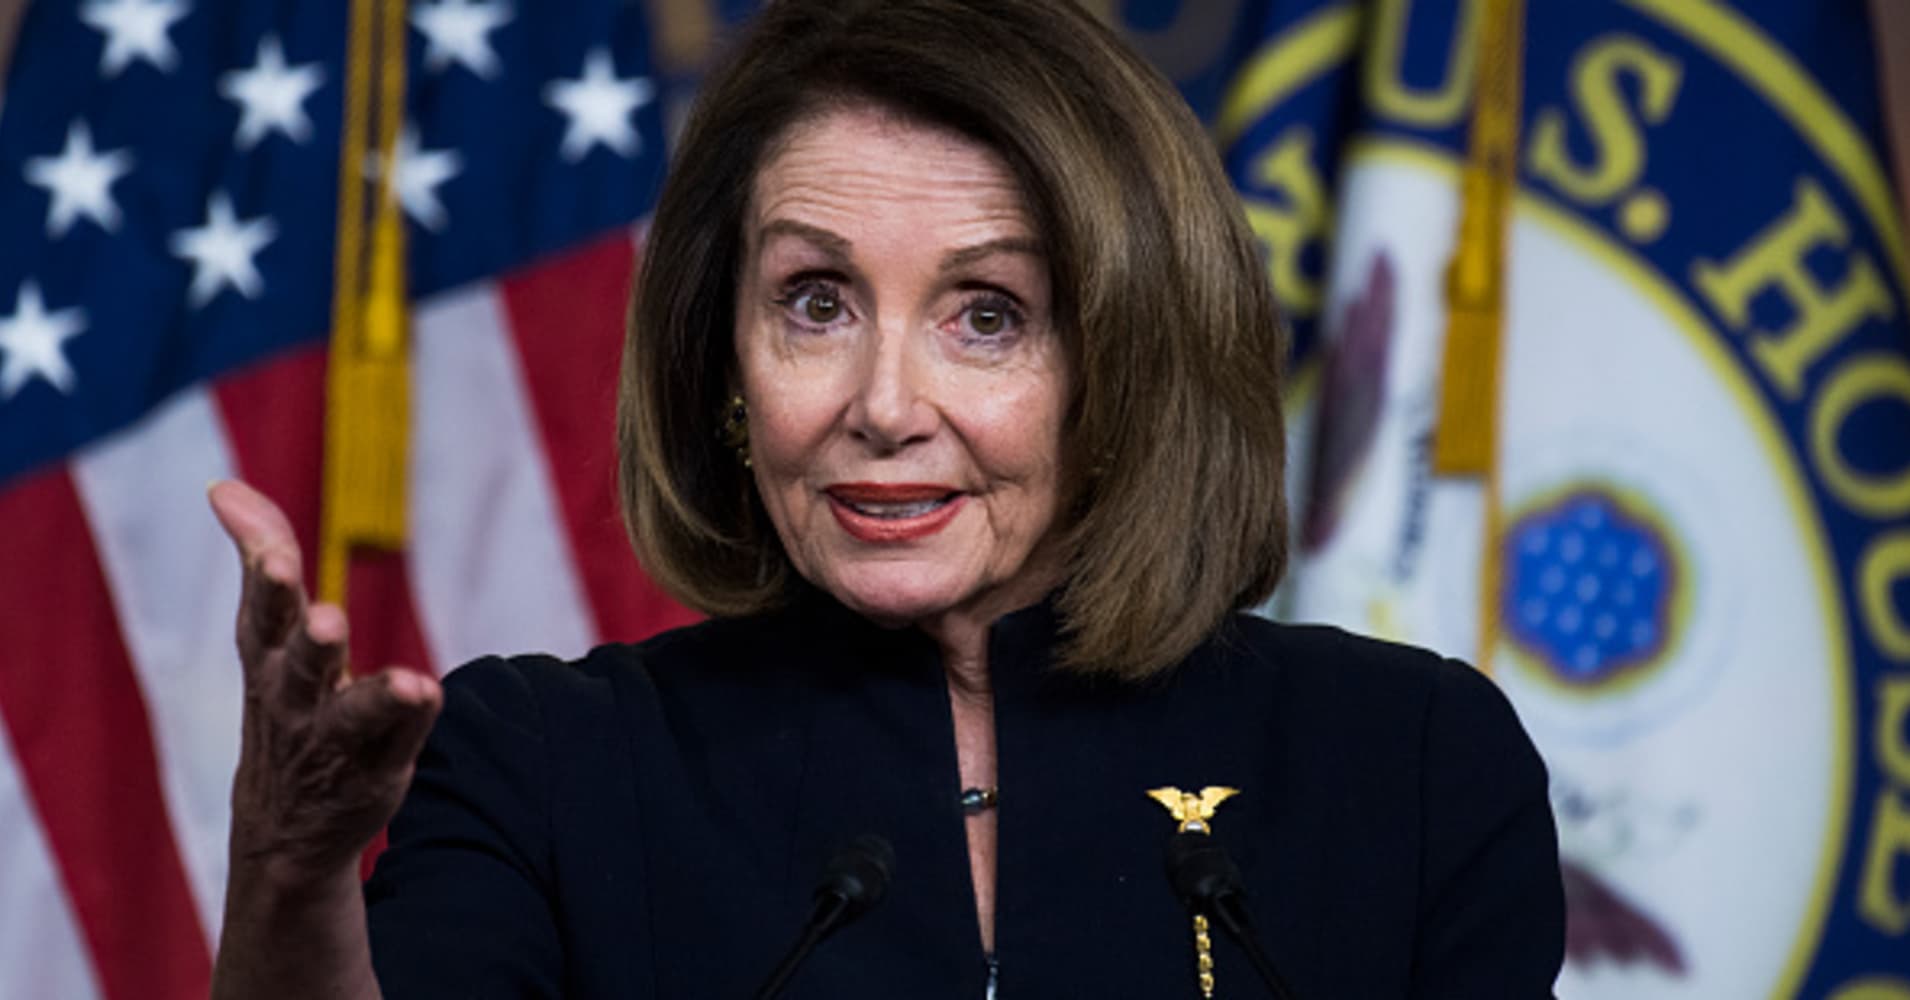 Pelosi warns GOP that a Democratic president could declare gun violence a national emergency